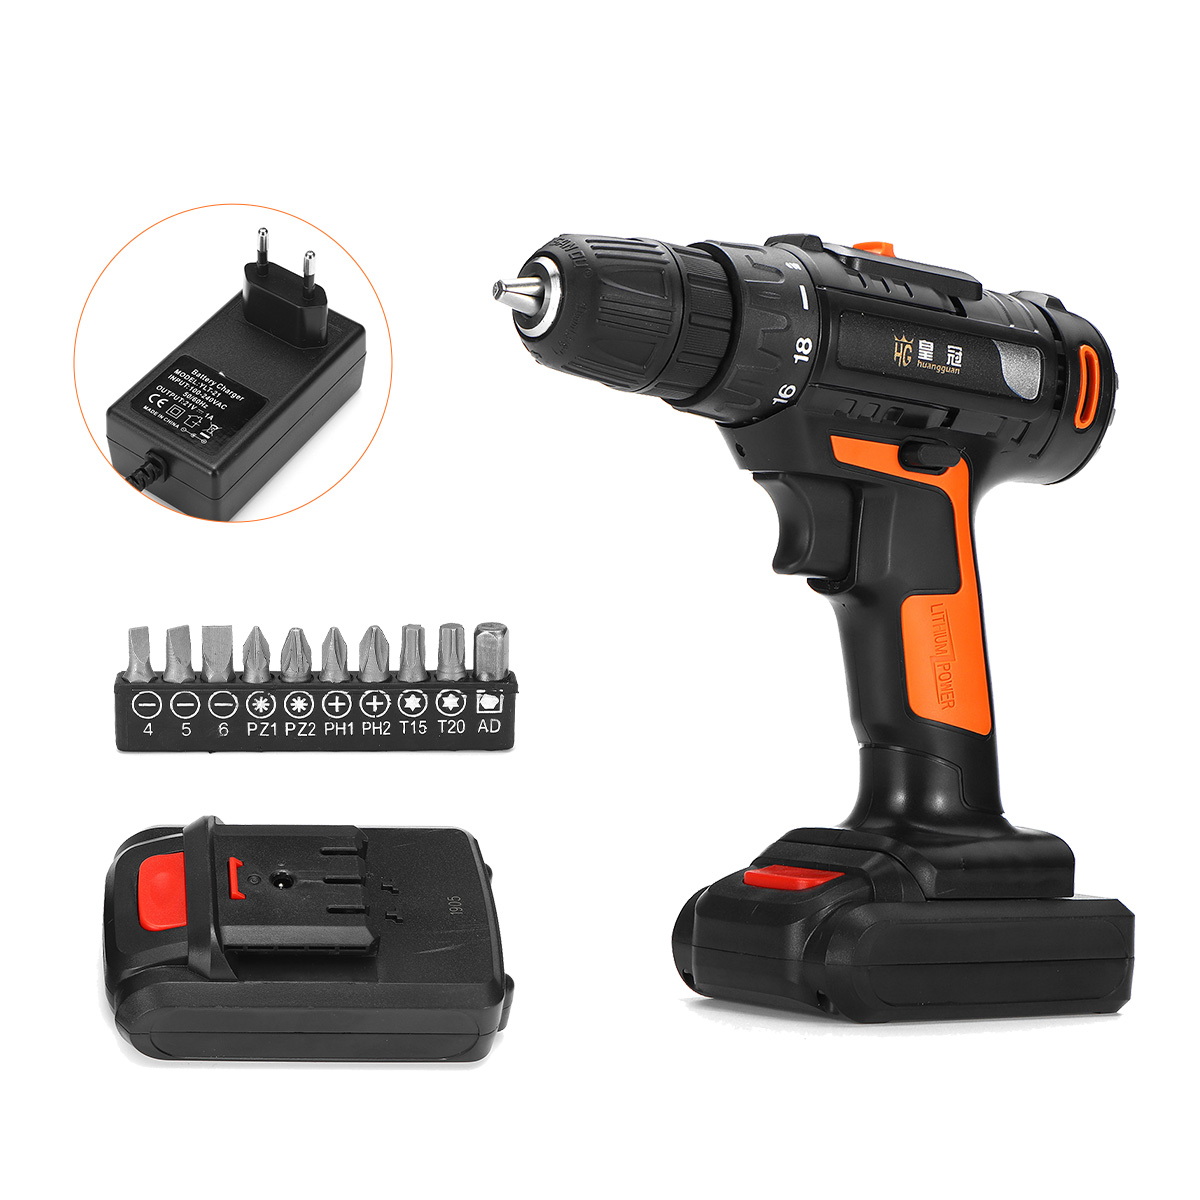 48V-Electric-Drill-Cordless-Rechargeable-Screwdriver-Drill-Screw-Set-Repair-Tools-Kit-1501700-10